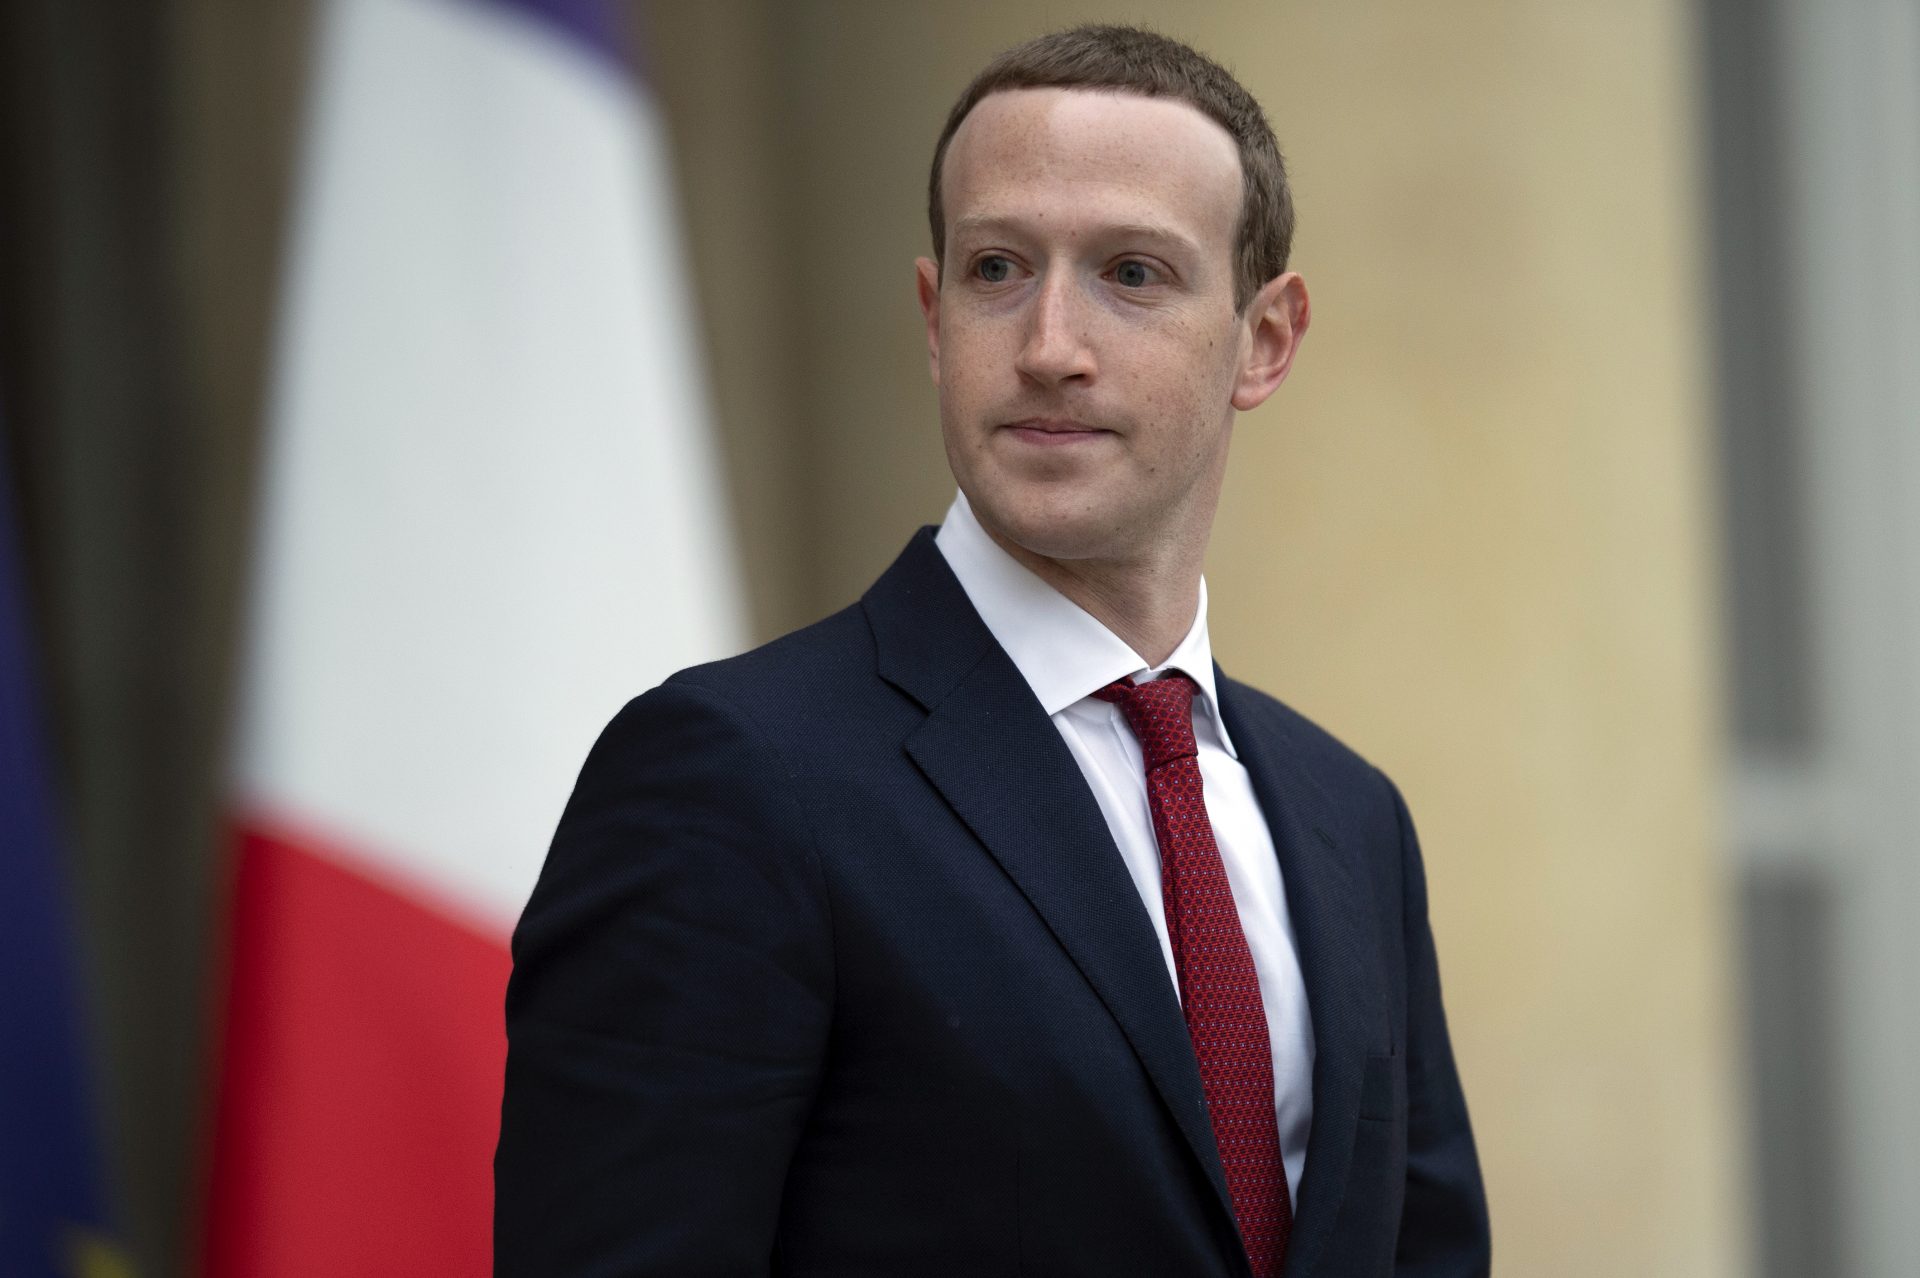 Facebook is being sued in France for alleged ‘spurious’ security claims